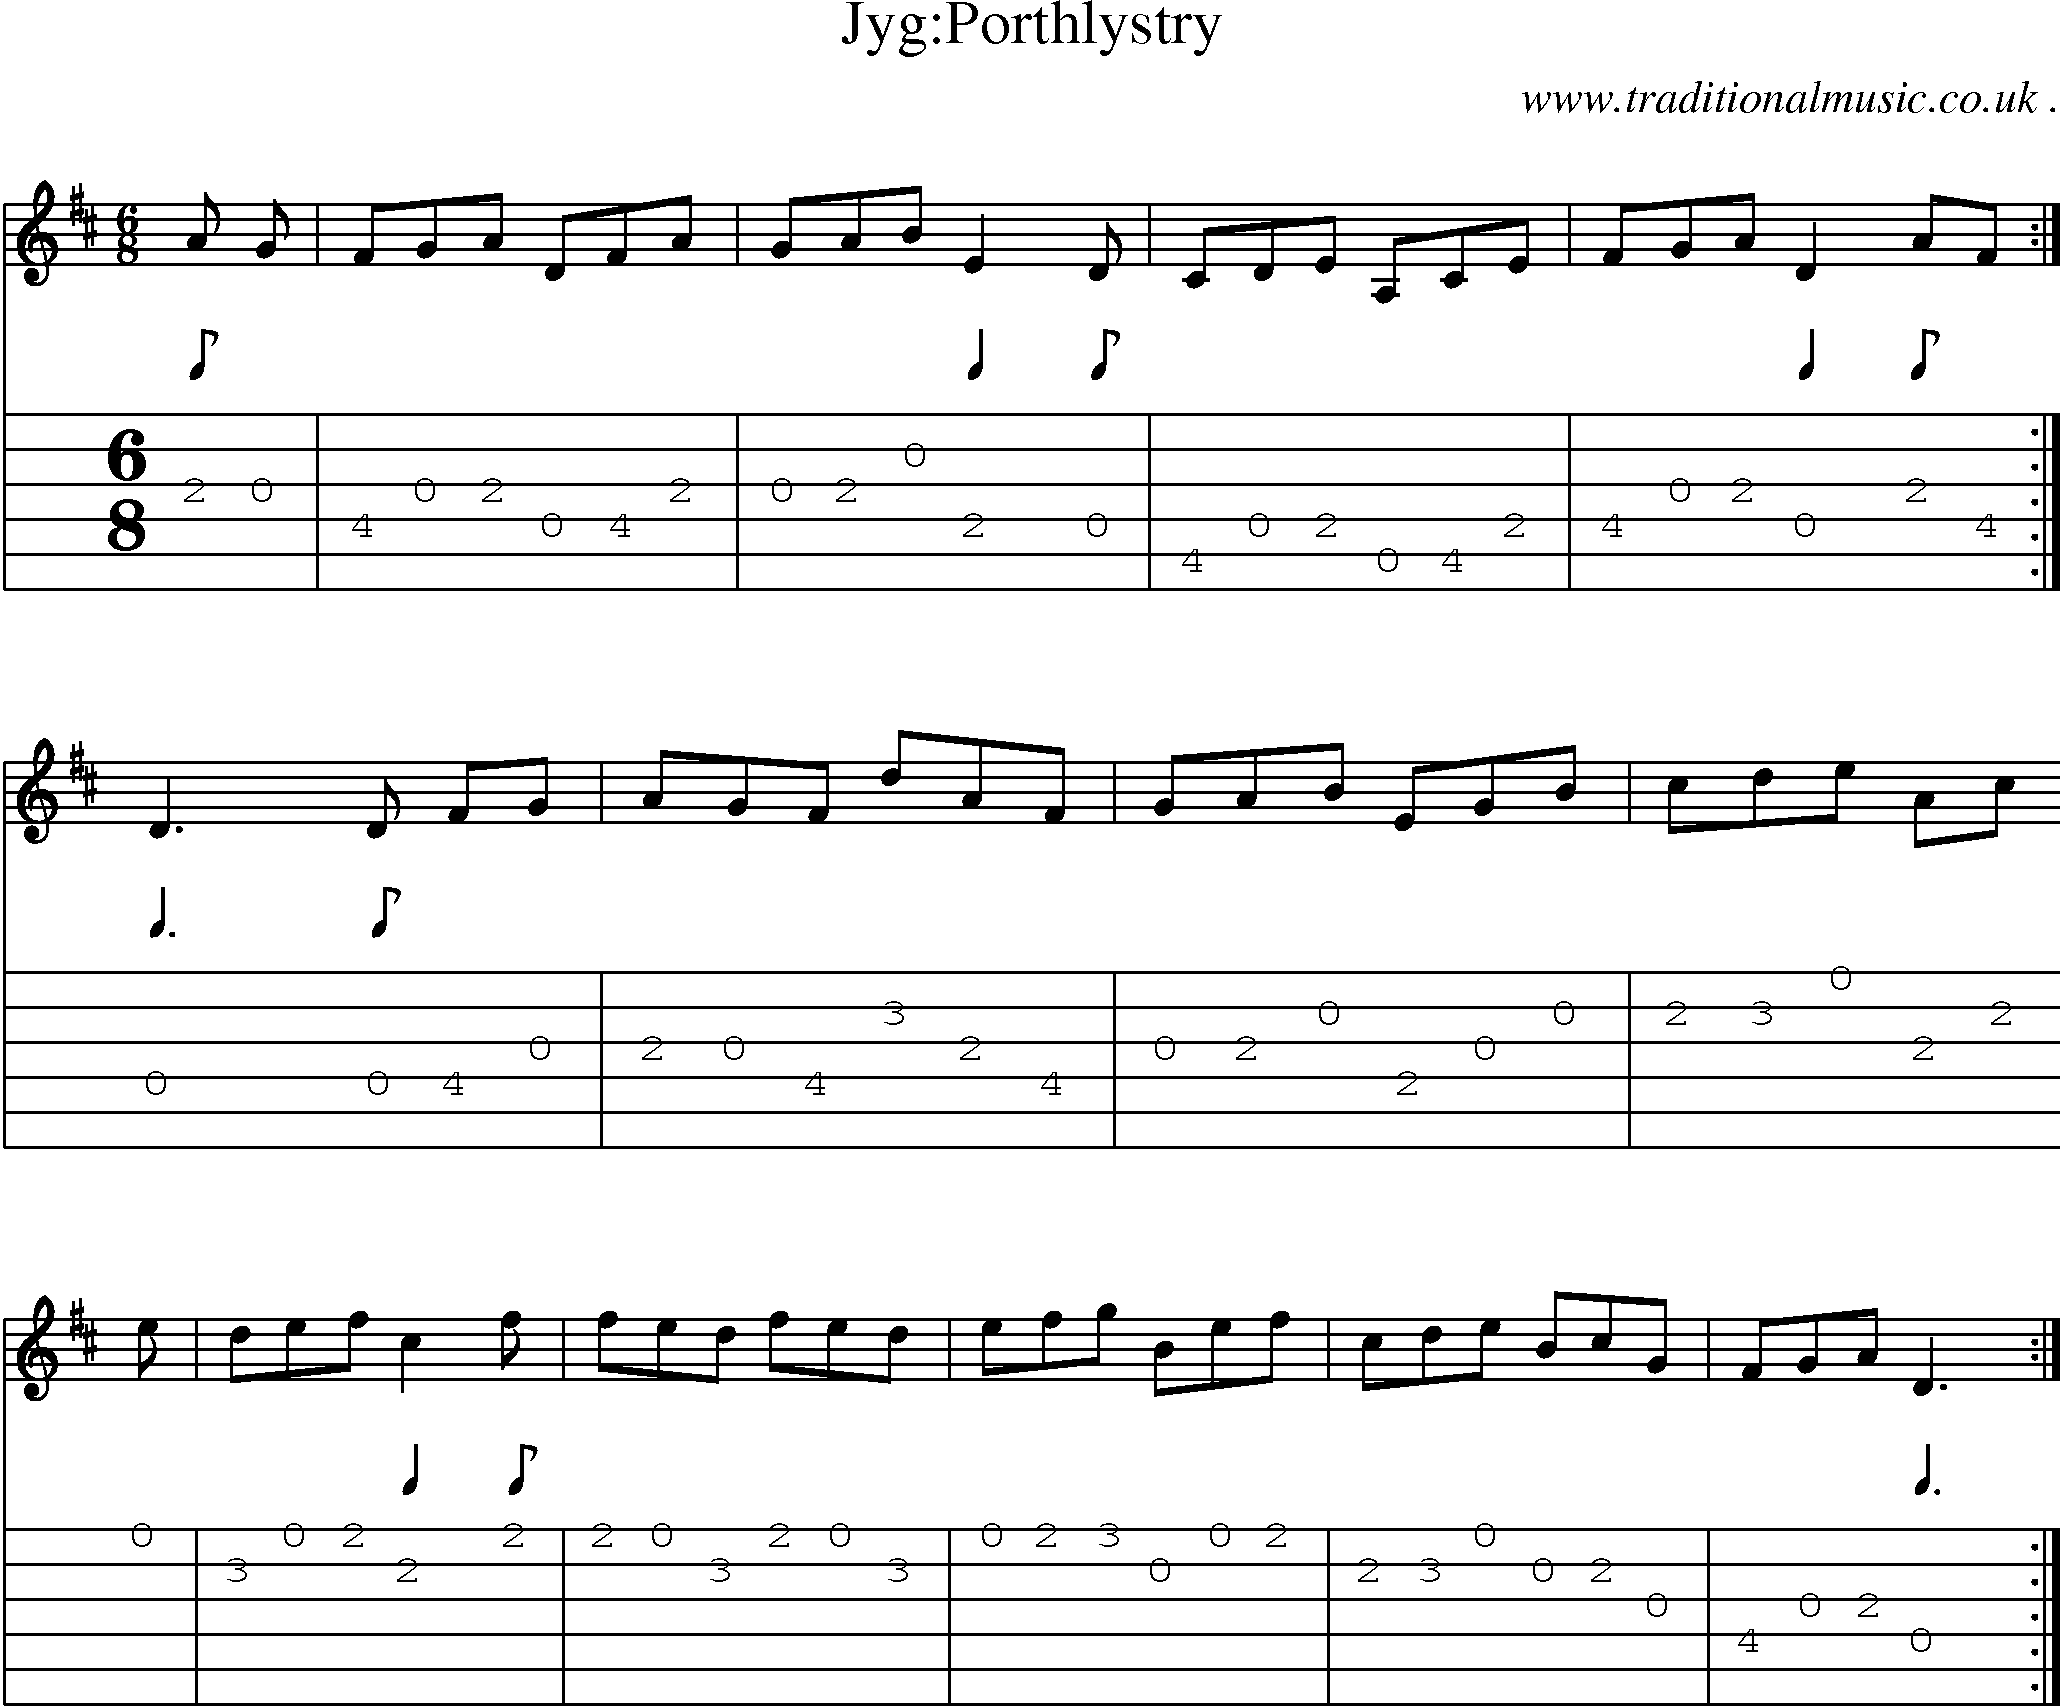 Sheet-Music and Guitar Tabs for Jygporthlystry